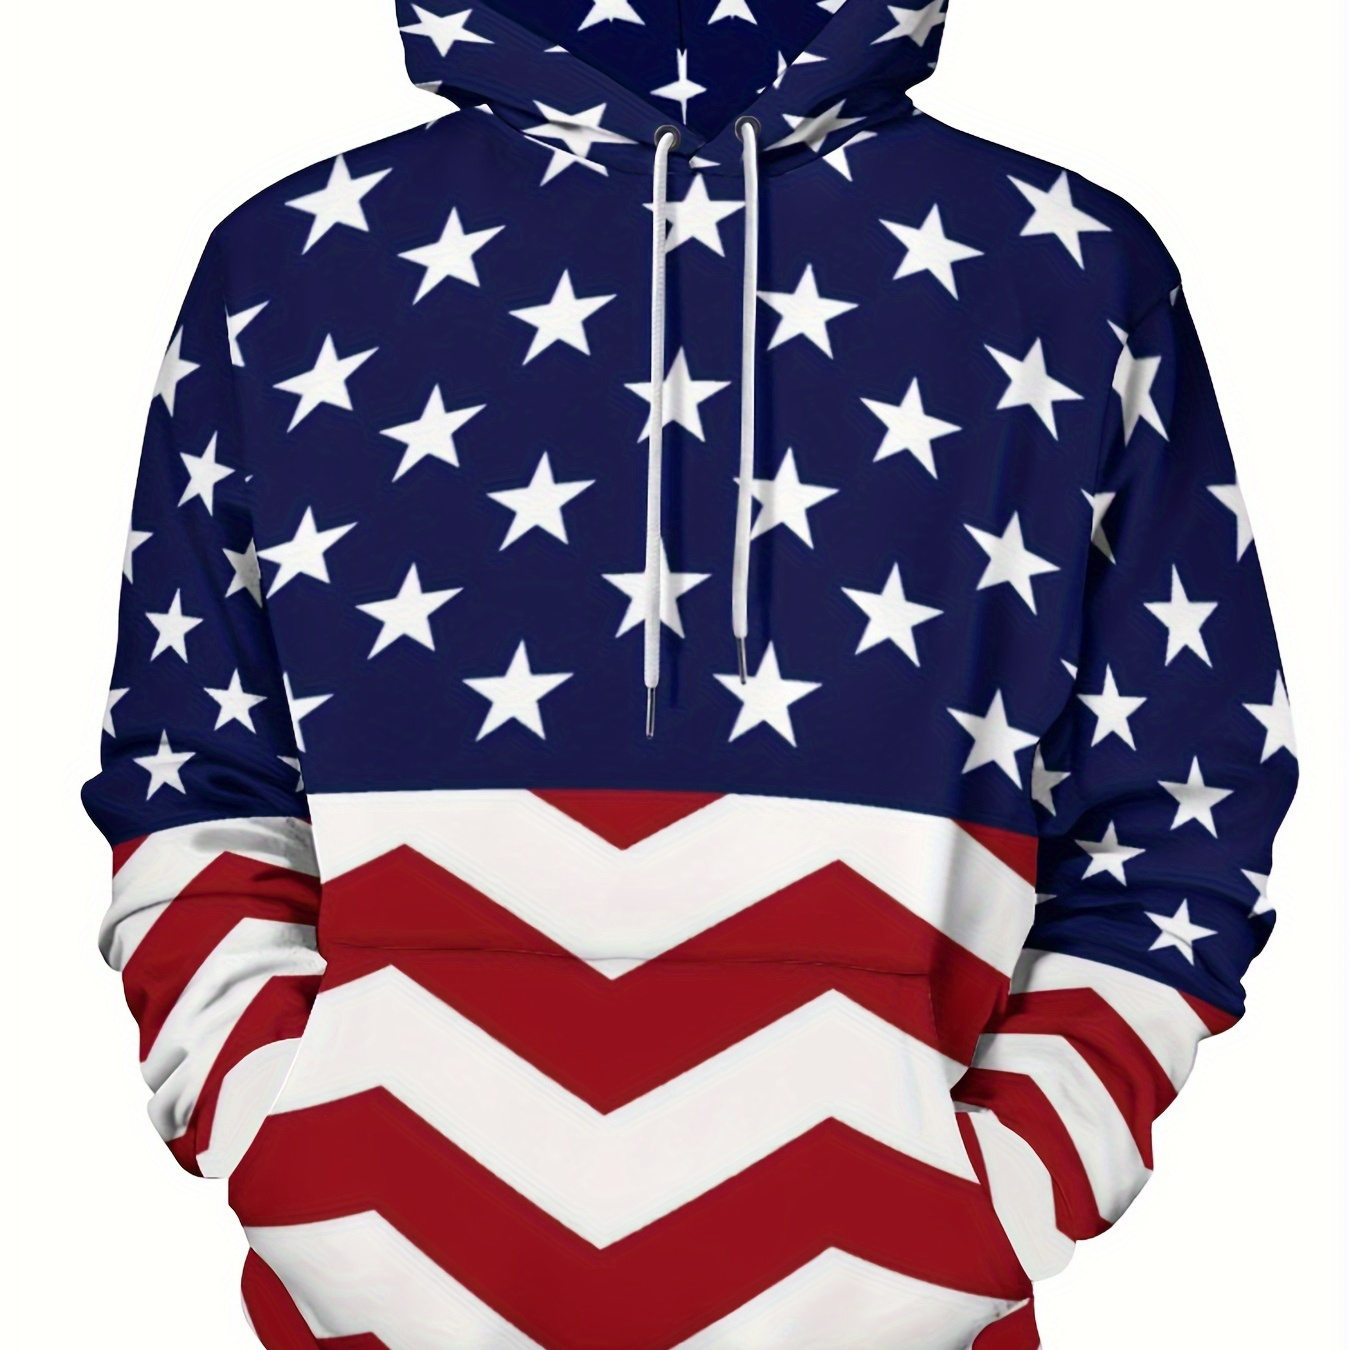 

Stars & Stripes Print Hoodie, Cool Hoodies For Men, Men's Casual Graphic Design Pullover Hooded Sweatshirt With Kangaroo Pocket Streetwear For Winter Fall, As Gifts